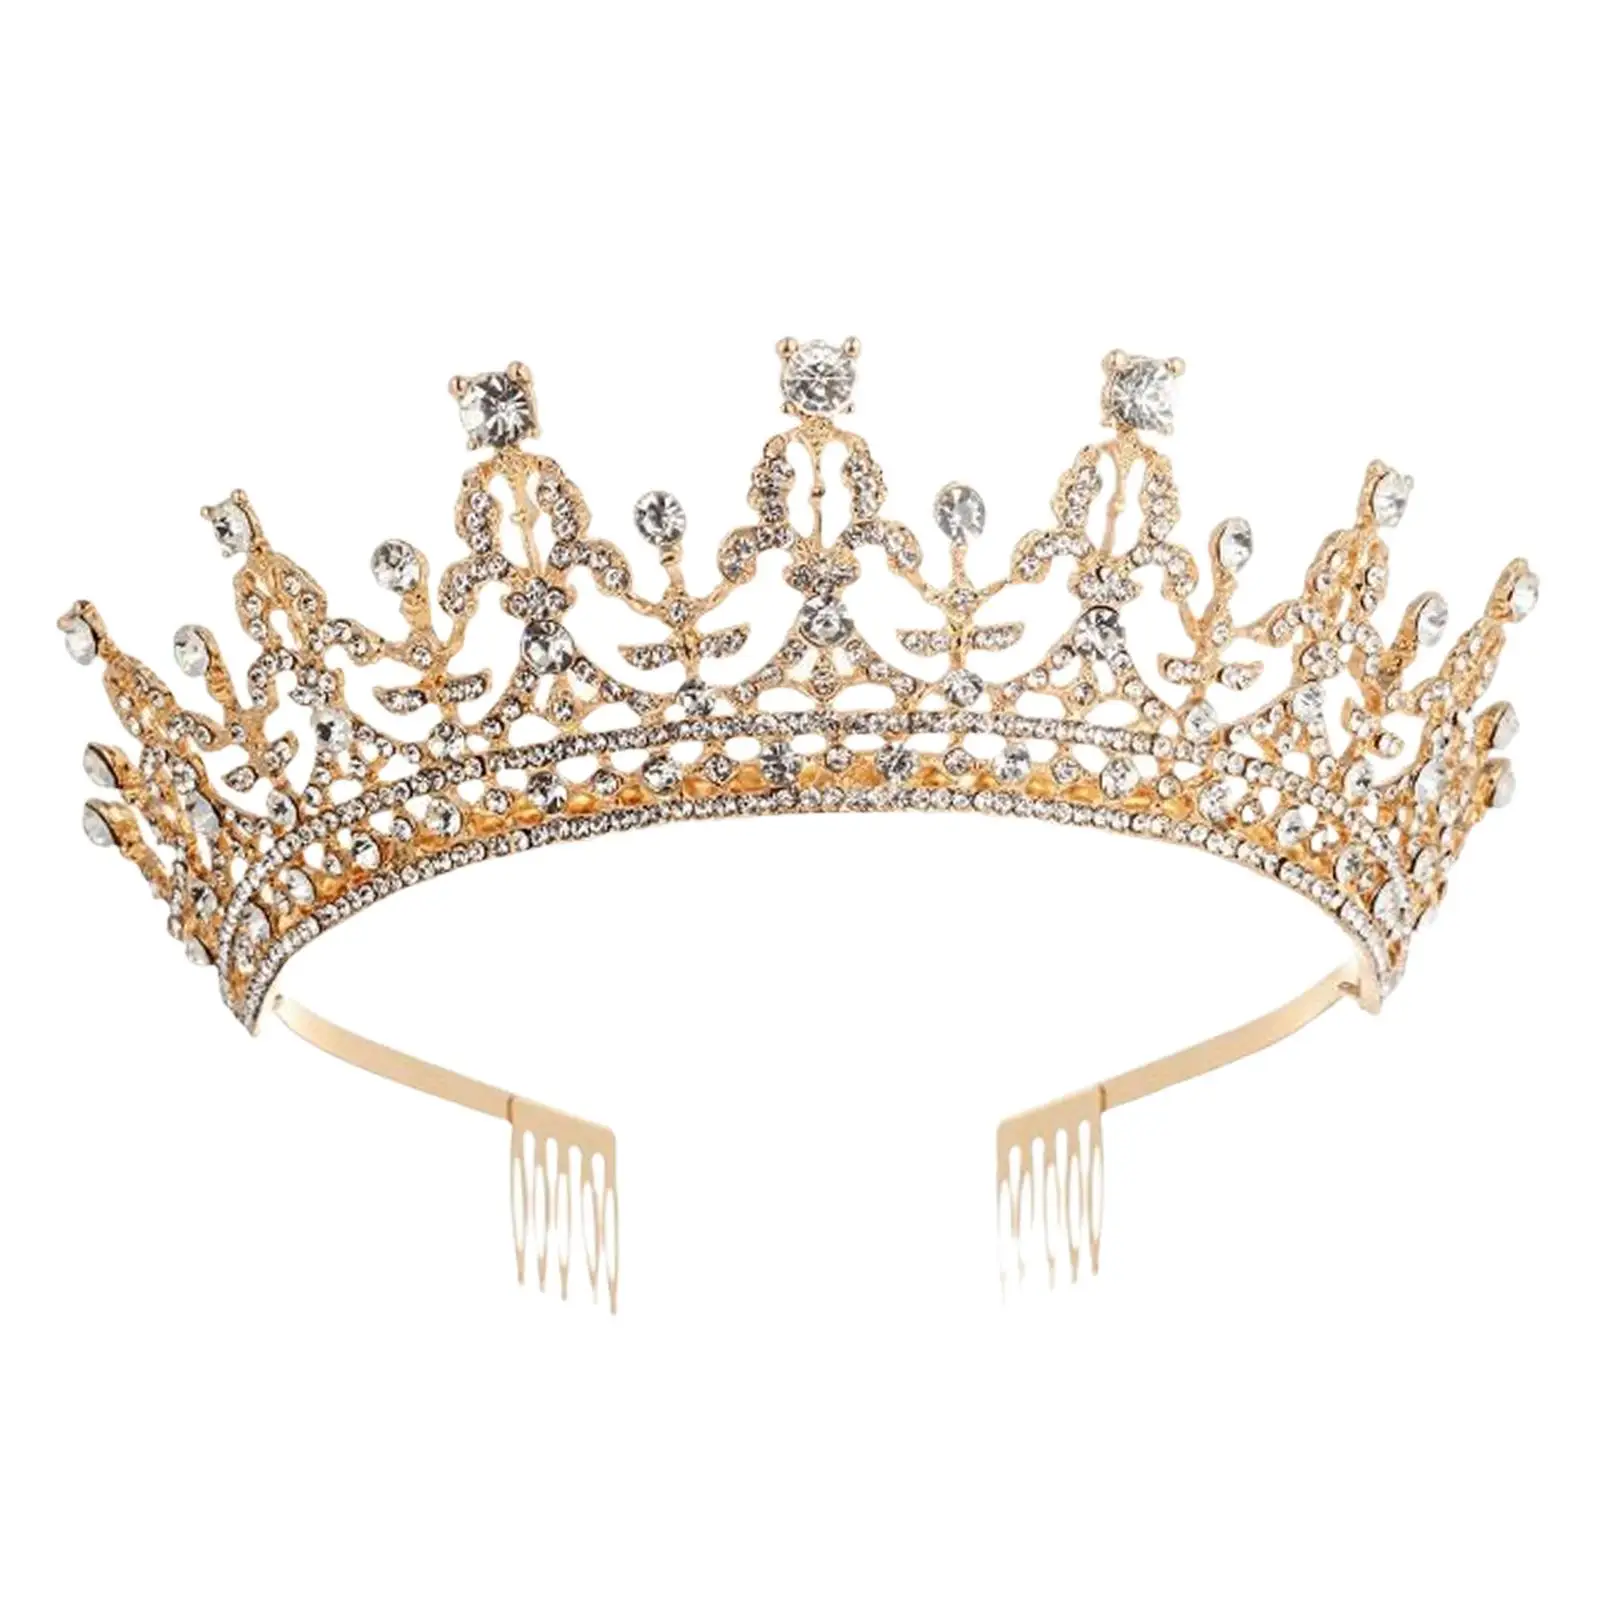 Crown Elegant for Girls Bridal Hair Accessories for Christmas Costume Halloween Cosplay